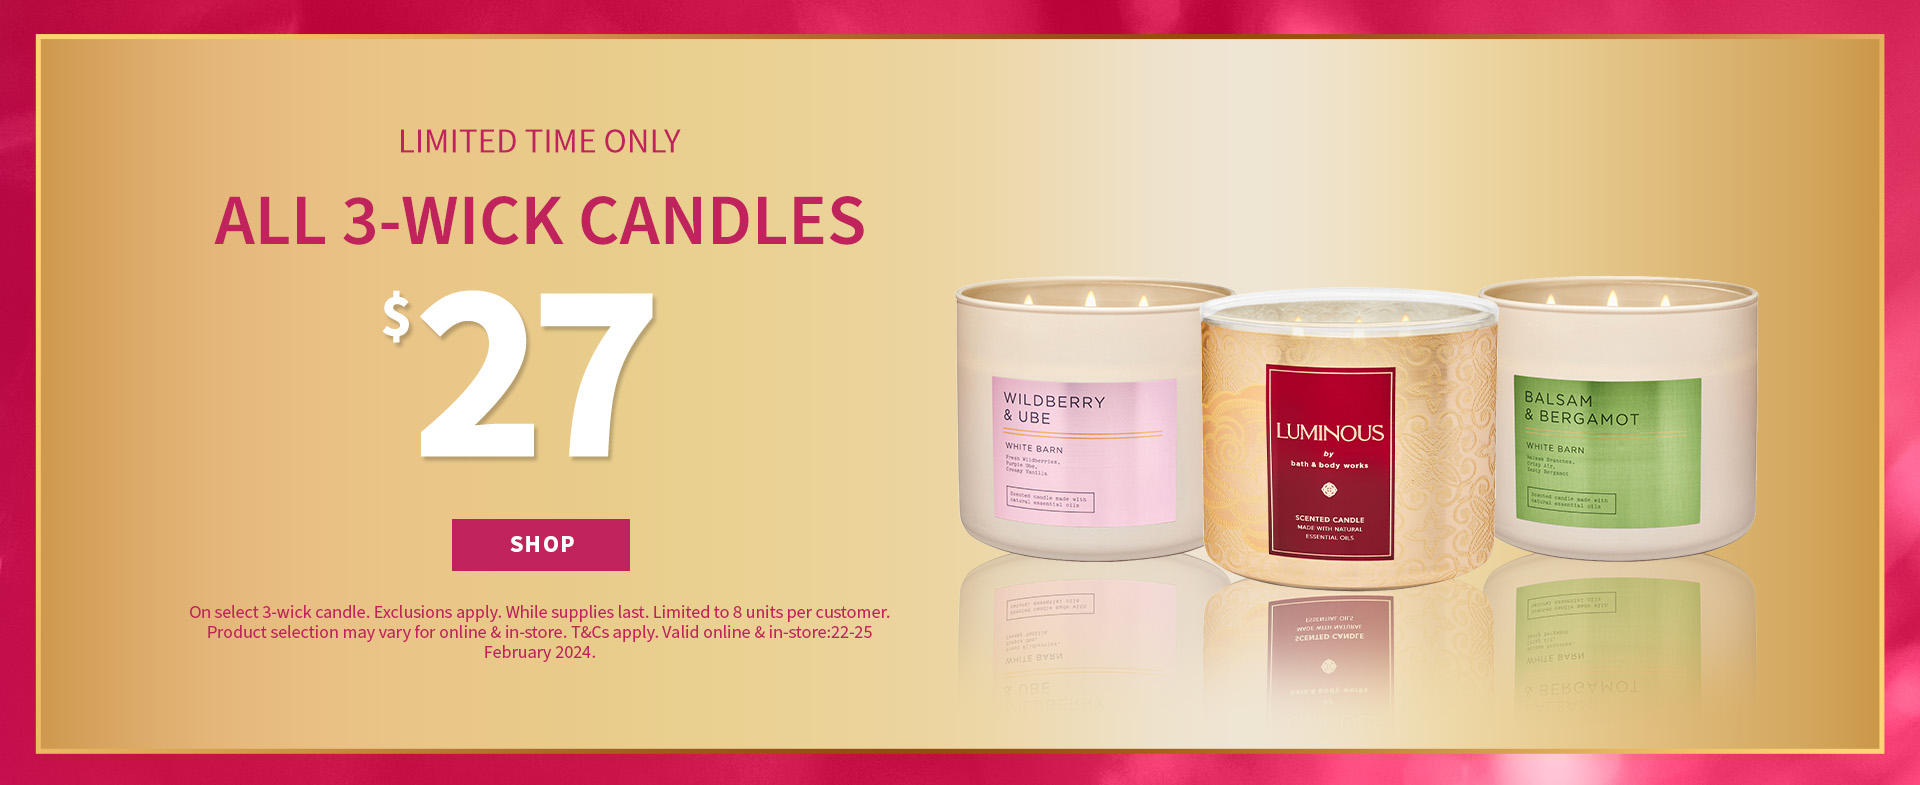 LIMITED TIME ONLY ALL 3-WICK CANDLES $$